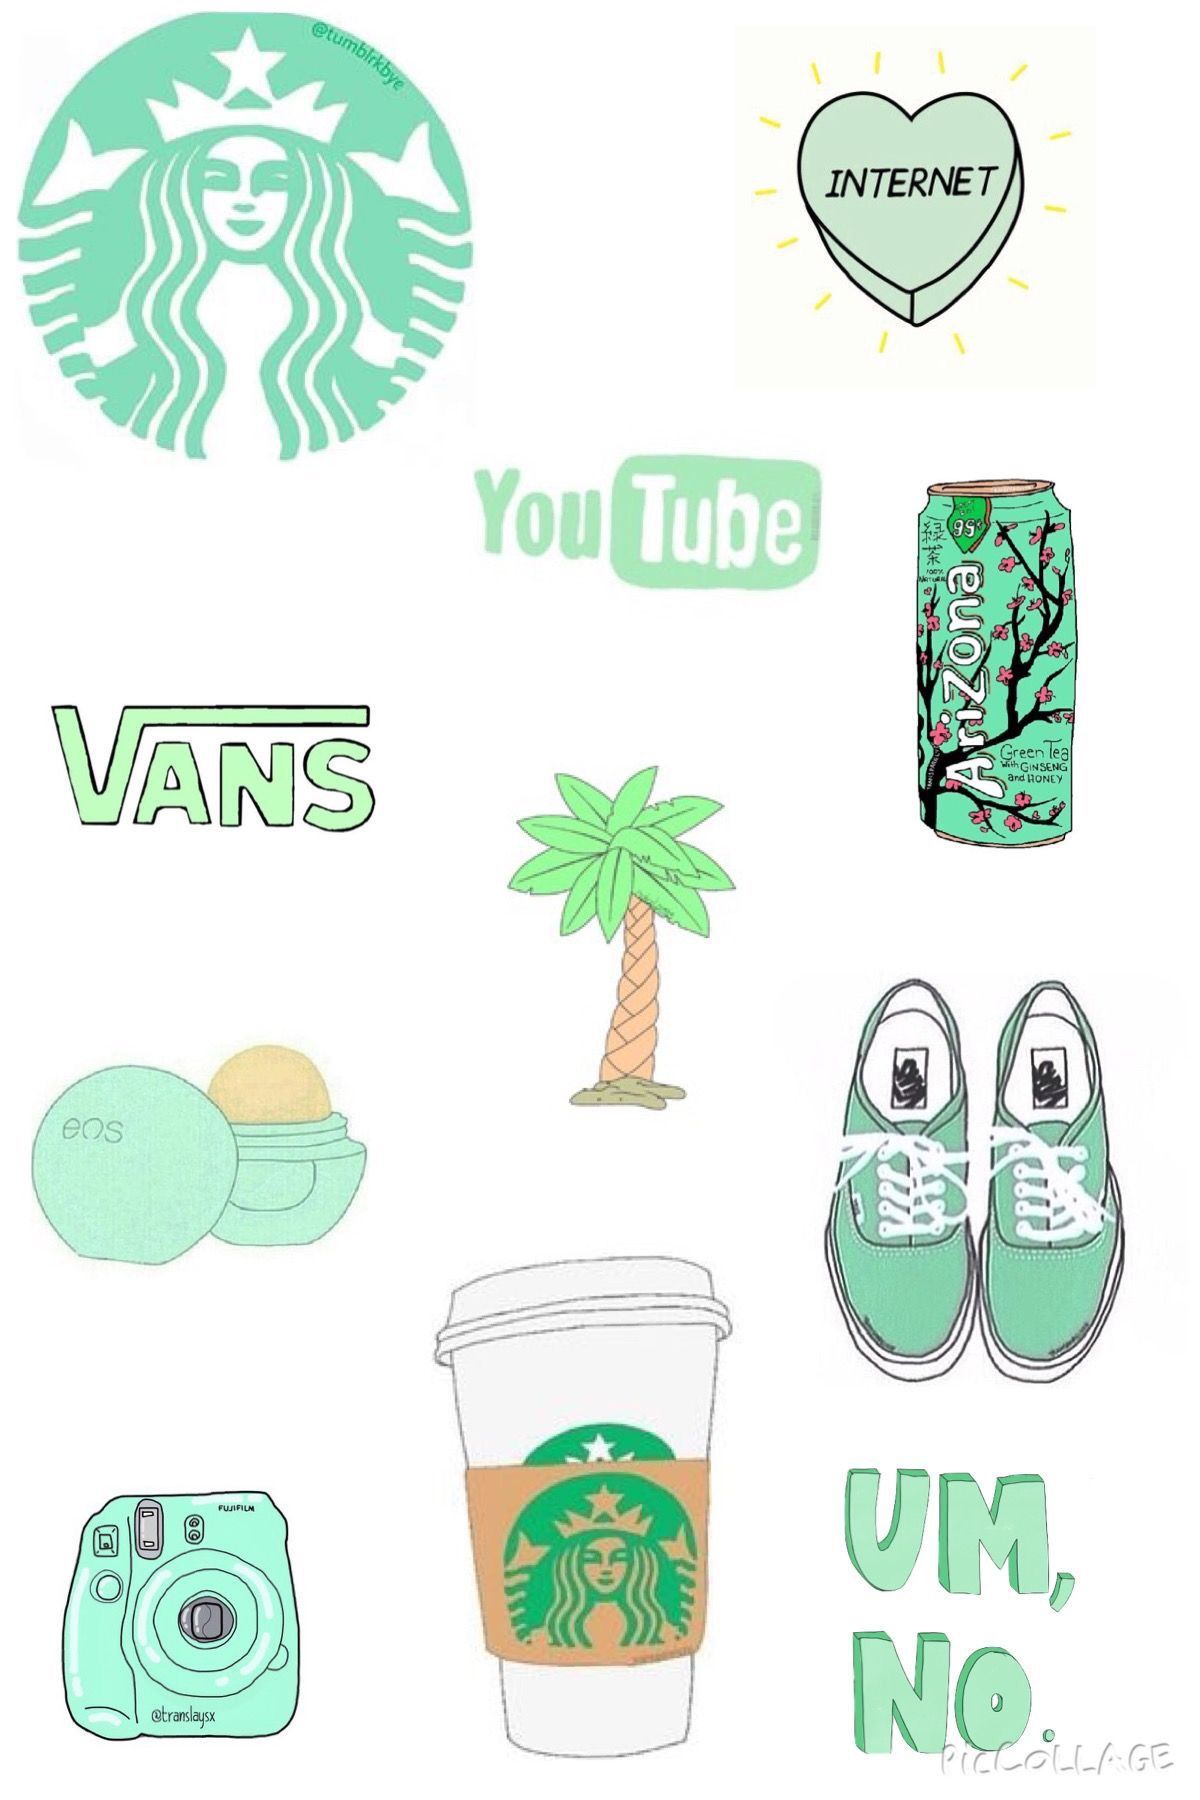 Wallpaper. iPhone case stickers, Tumblr stickers, Cute stickers